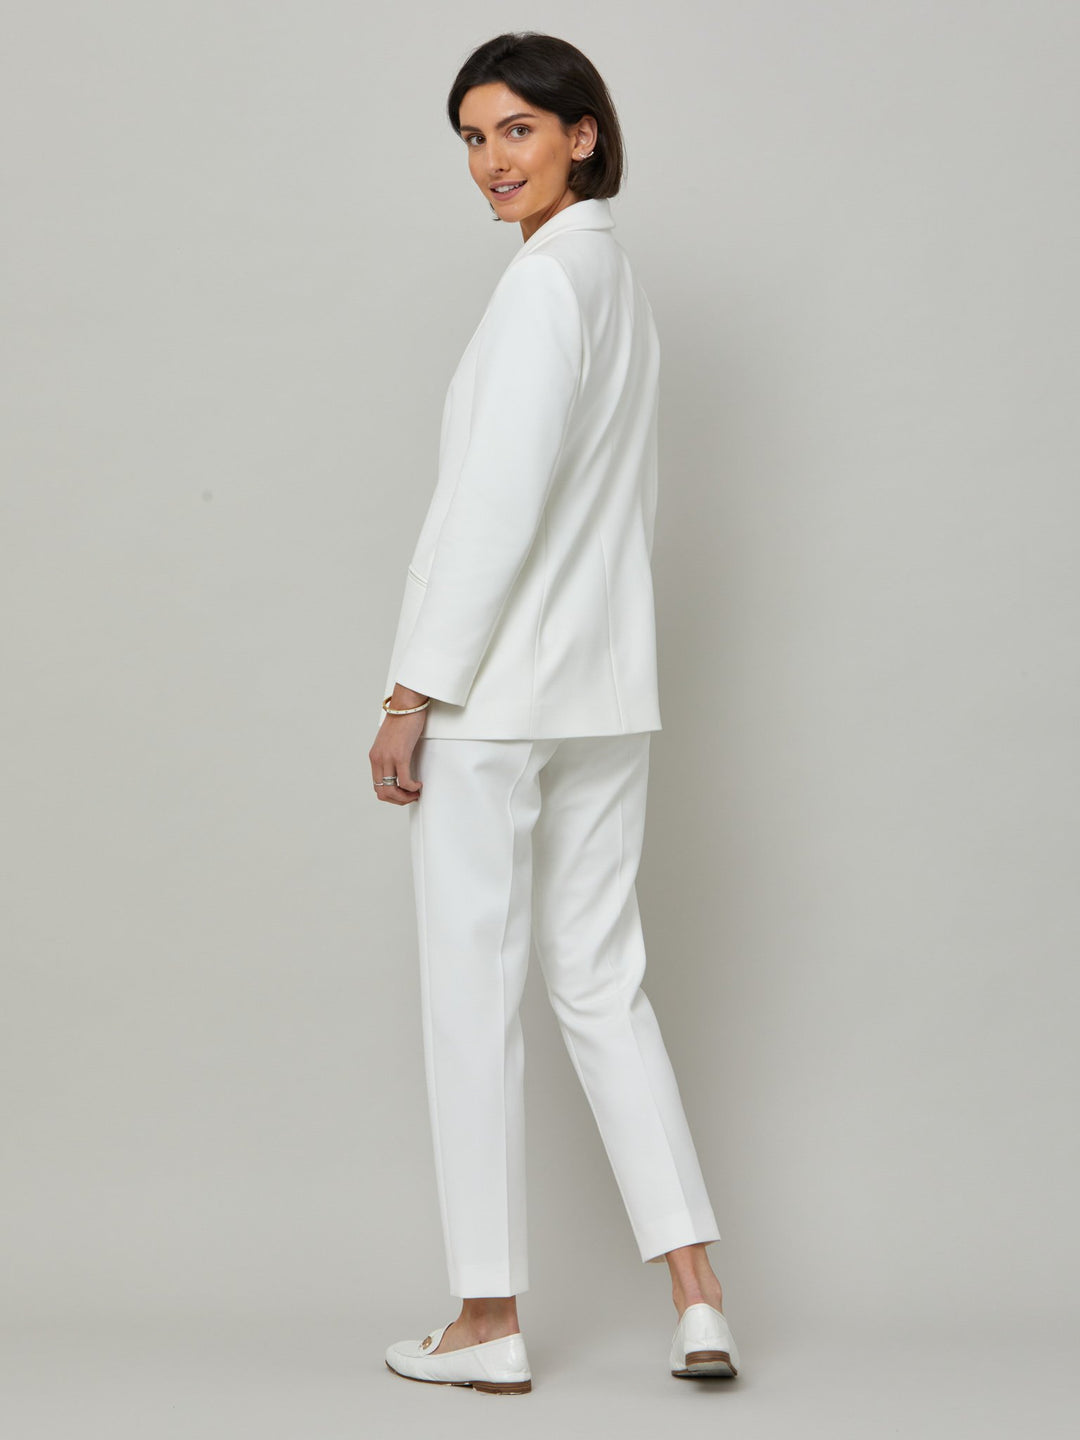 Meet Darcie, a minimalist wardrobe must-have. This piece will elevate your wardrobe. Style with matching slim leg or bootleg pants for chic and tailored look. Fabricated in our signature double crepe with a hint of stretch in iconic white. The perfect balance between classic & elegance.